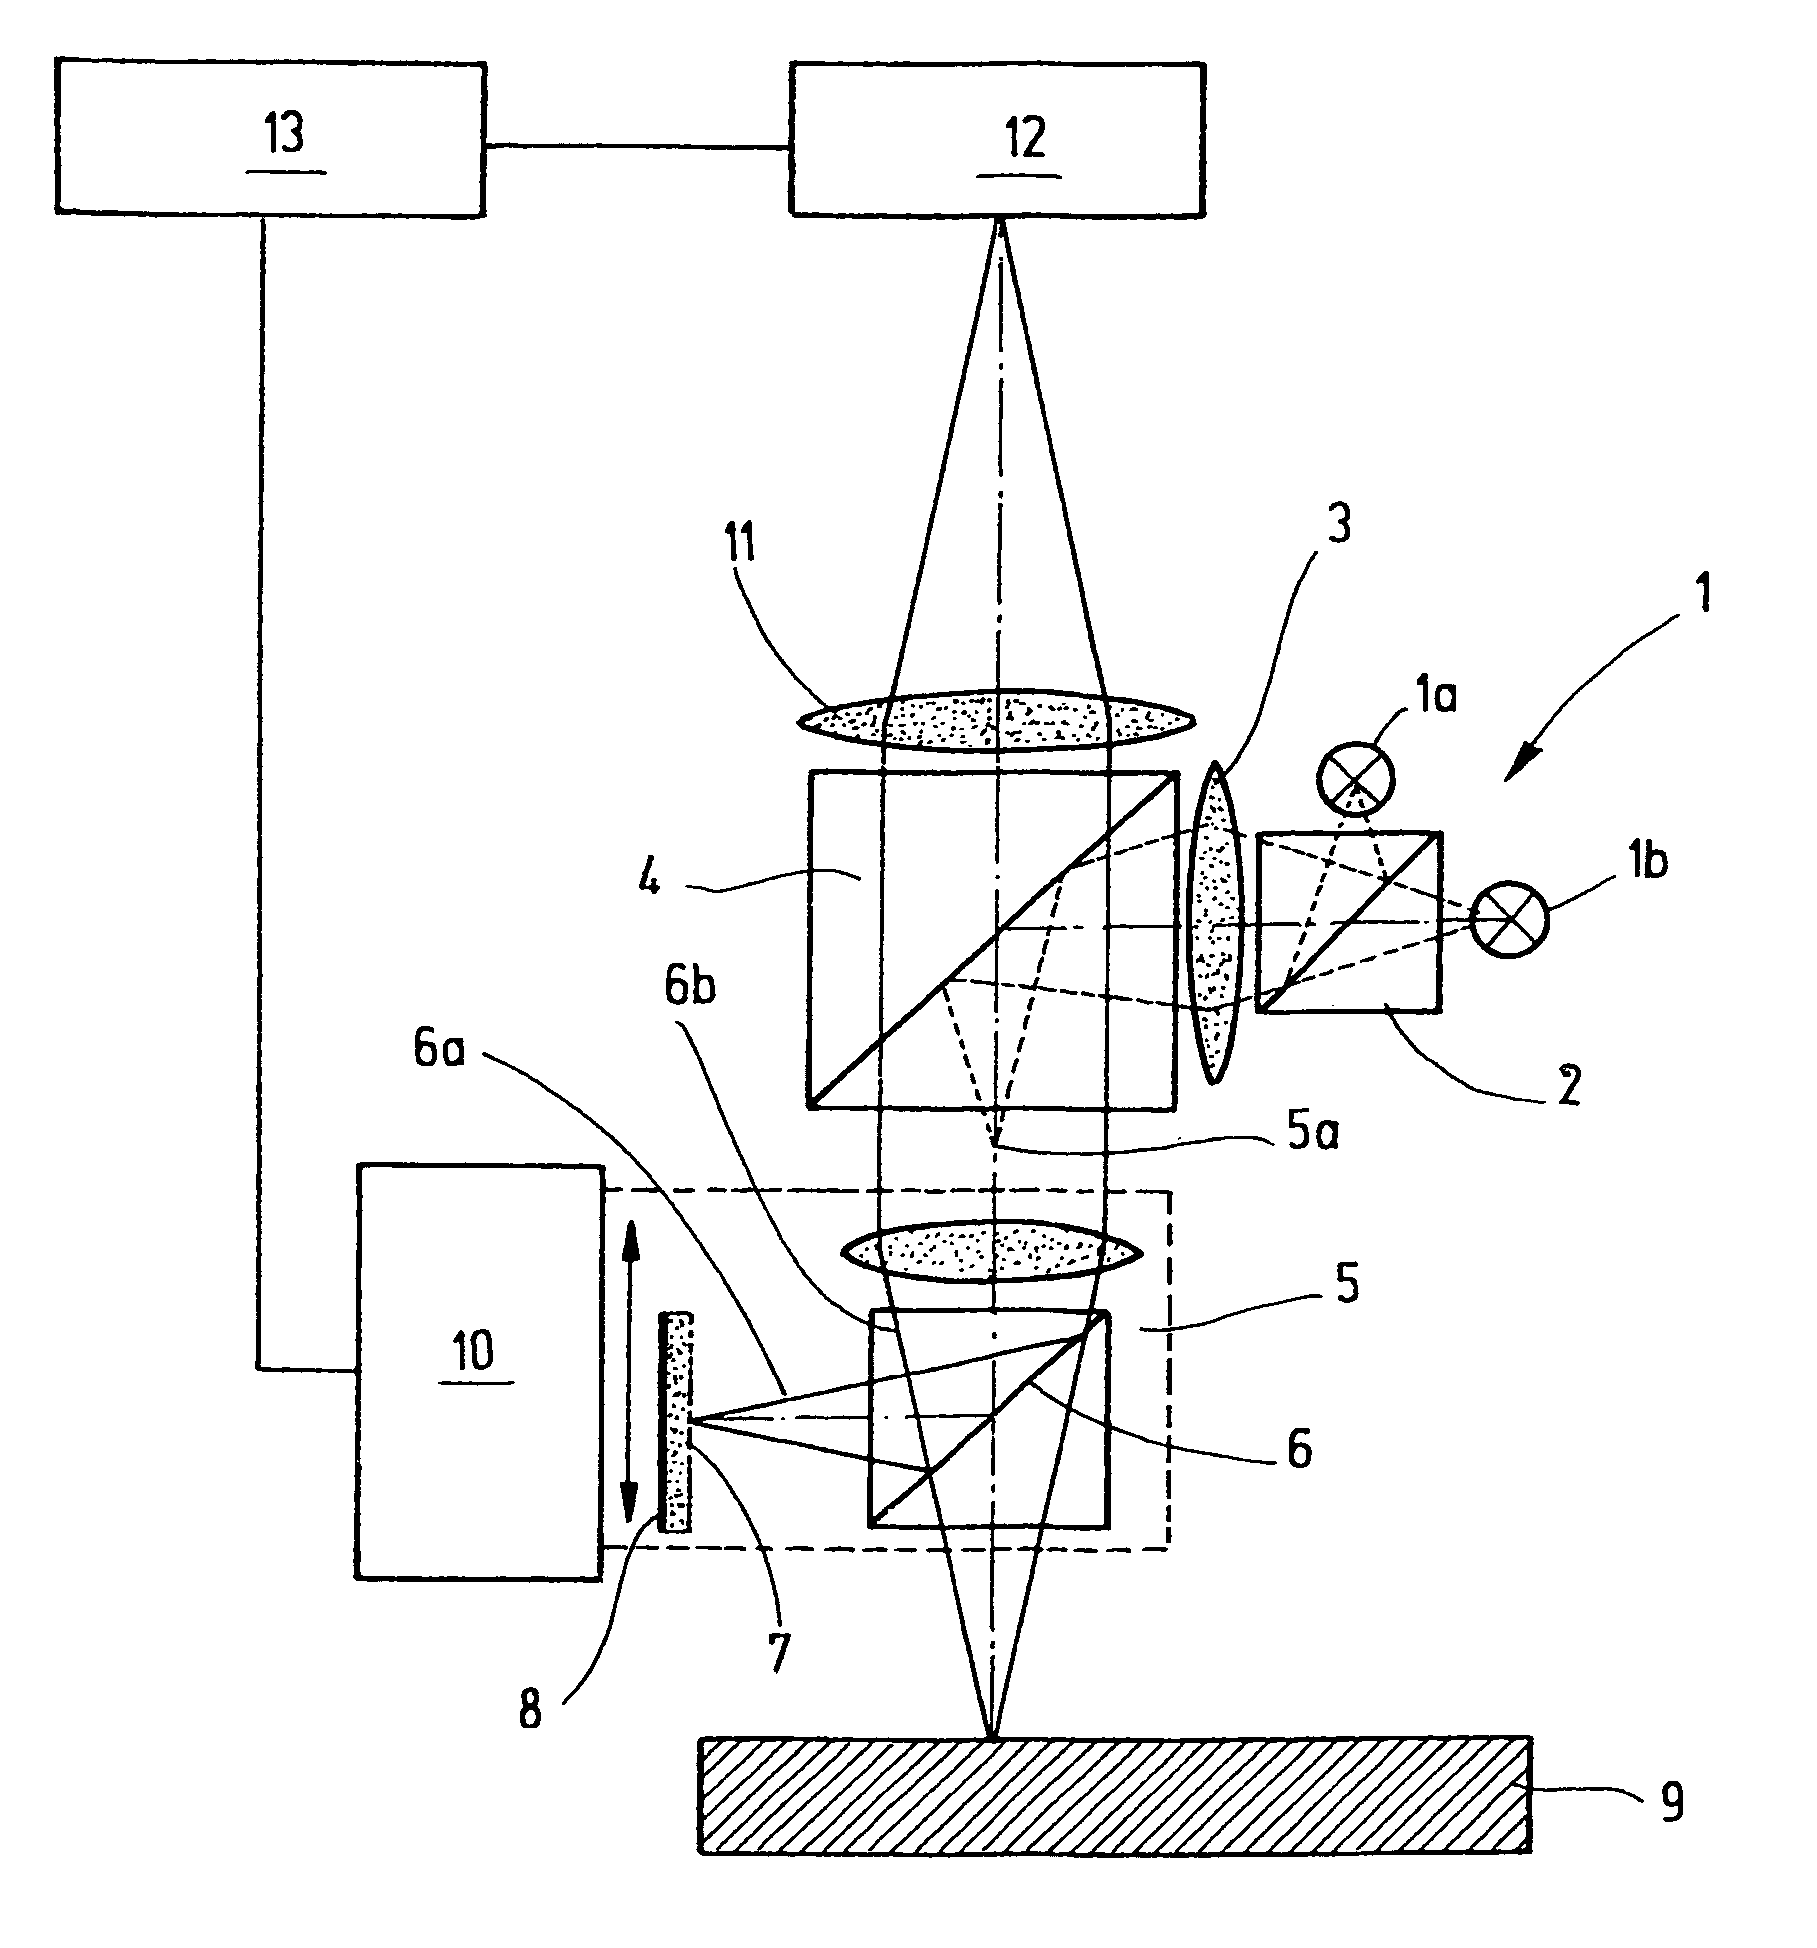 Device and method for a combined interferometry and image-based determination of geometry, especially for use in micro system engineering